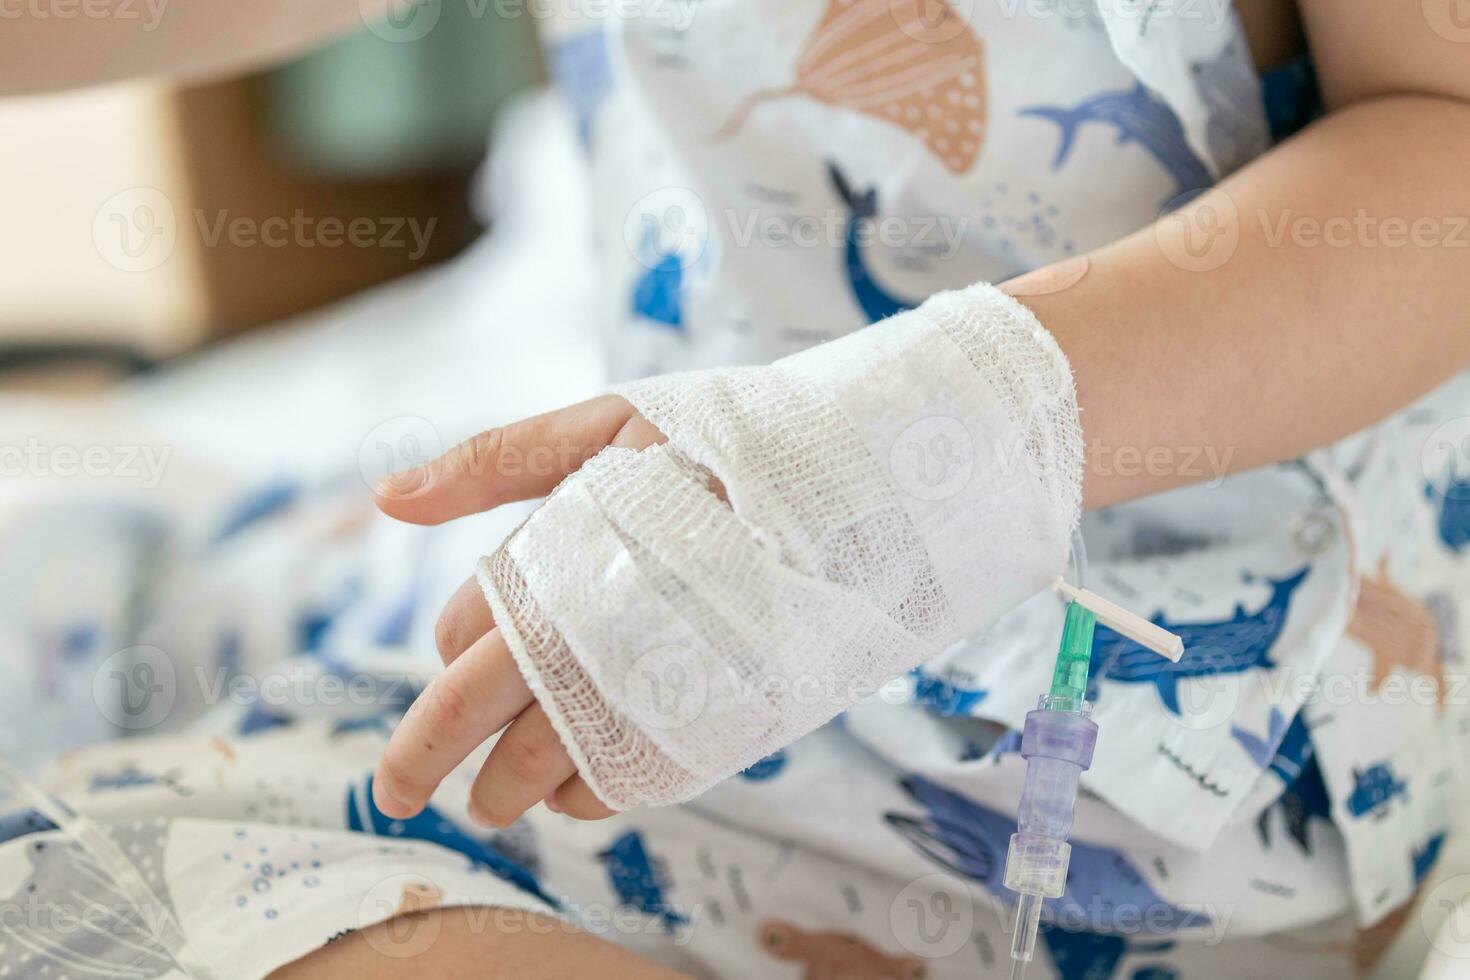 Close up child hand with saline IV solution in hospital photo